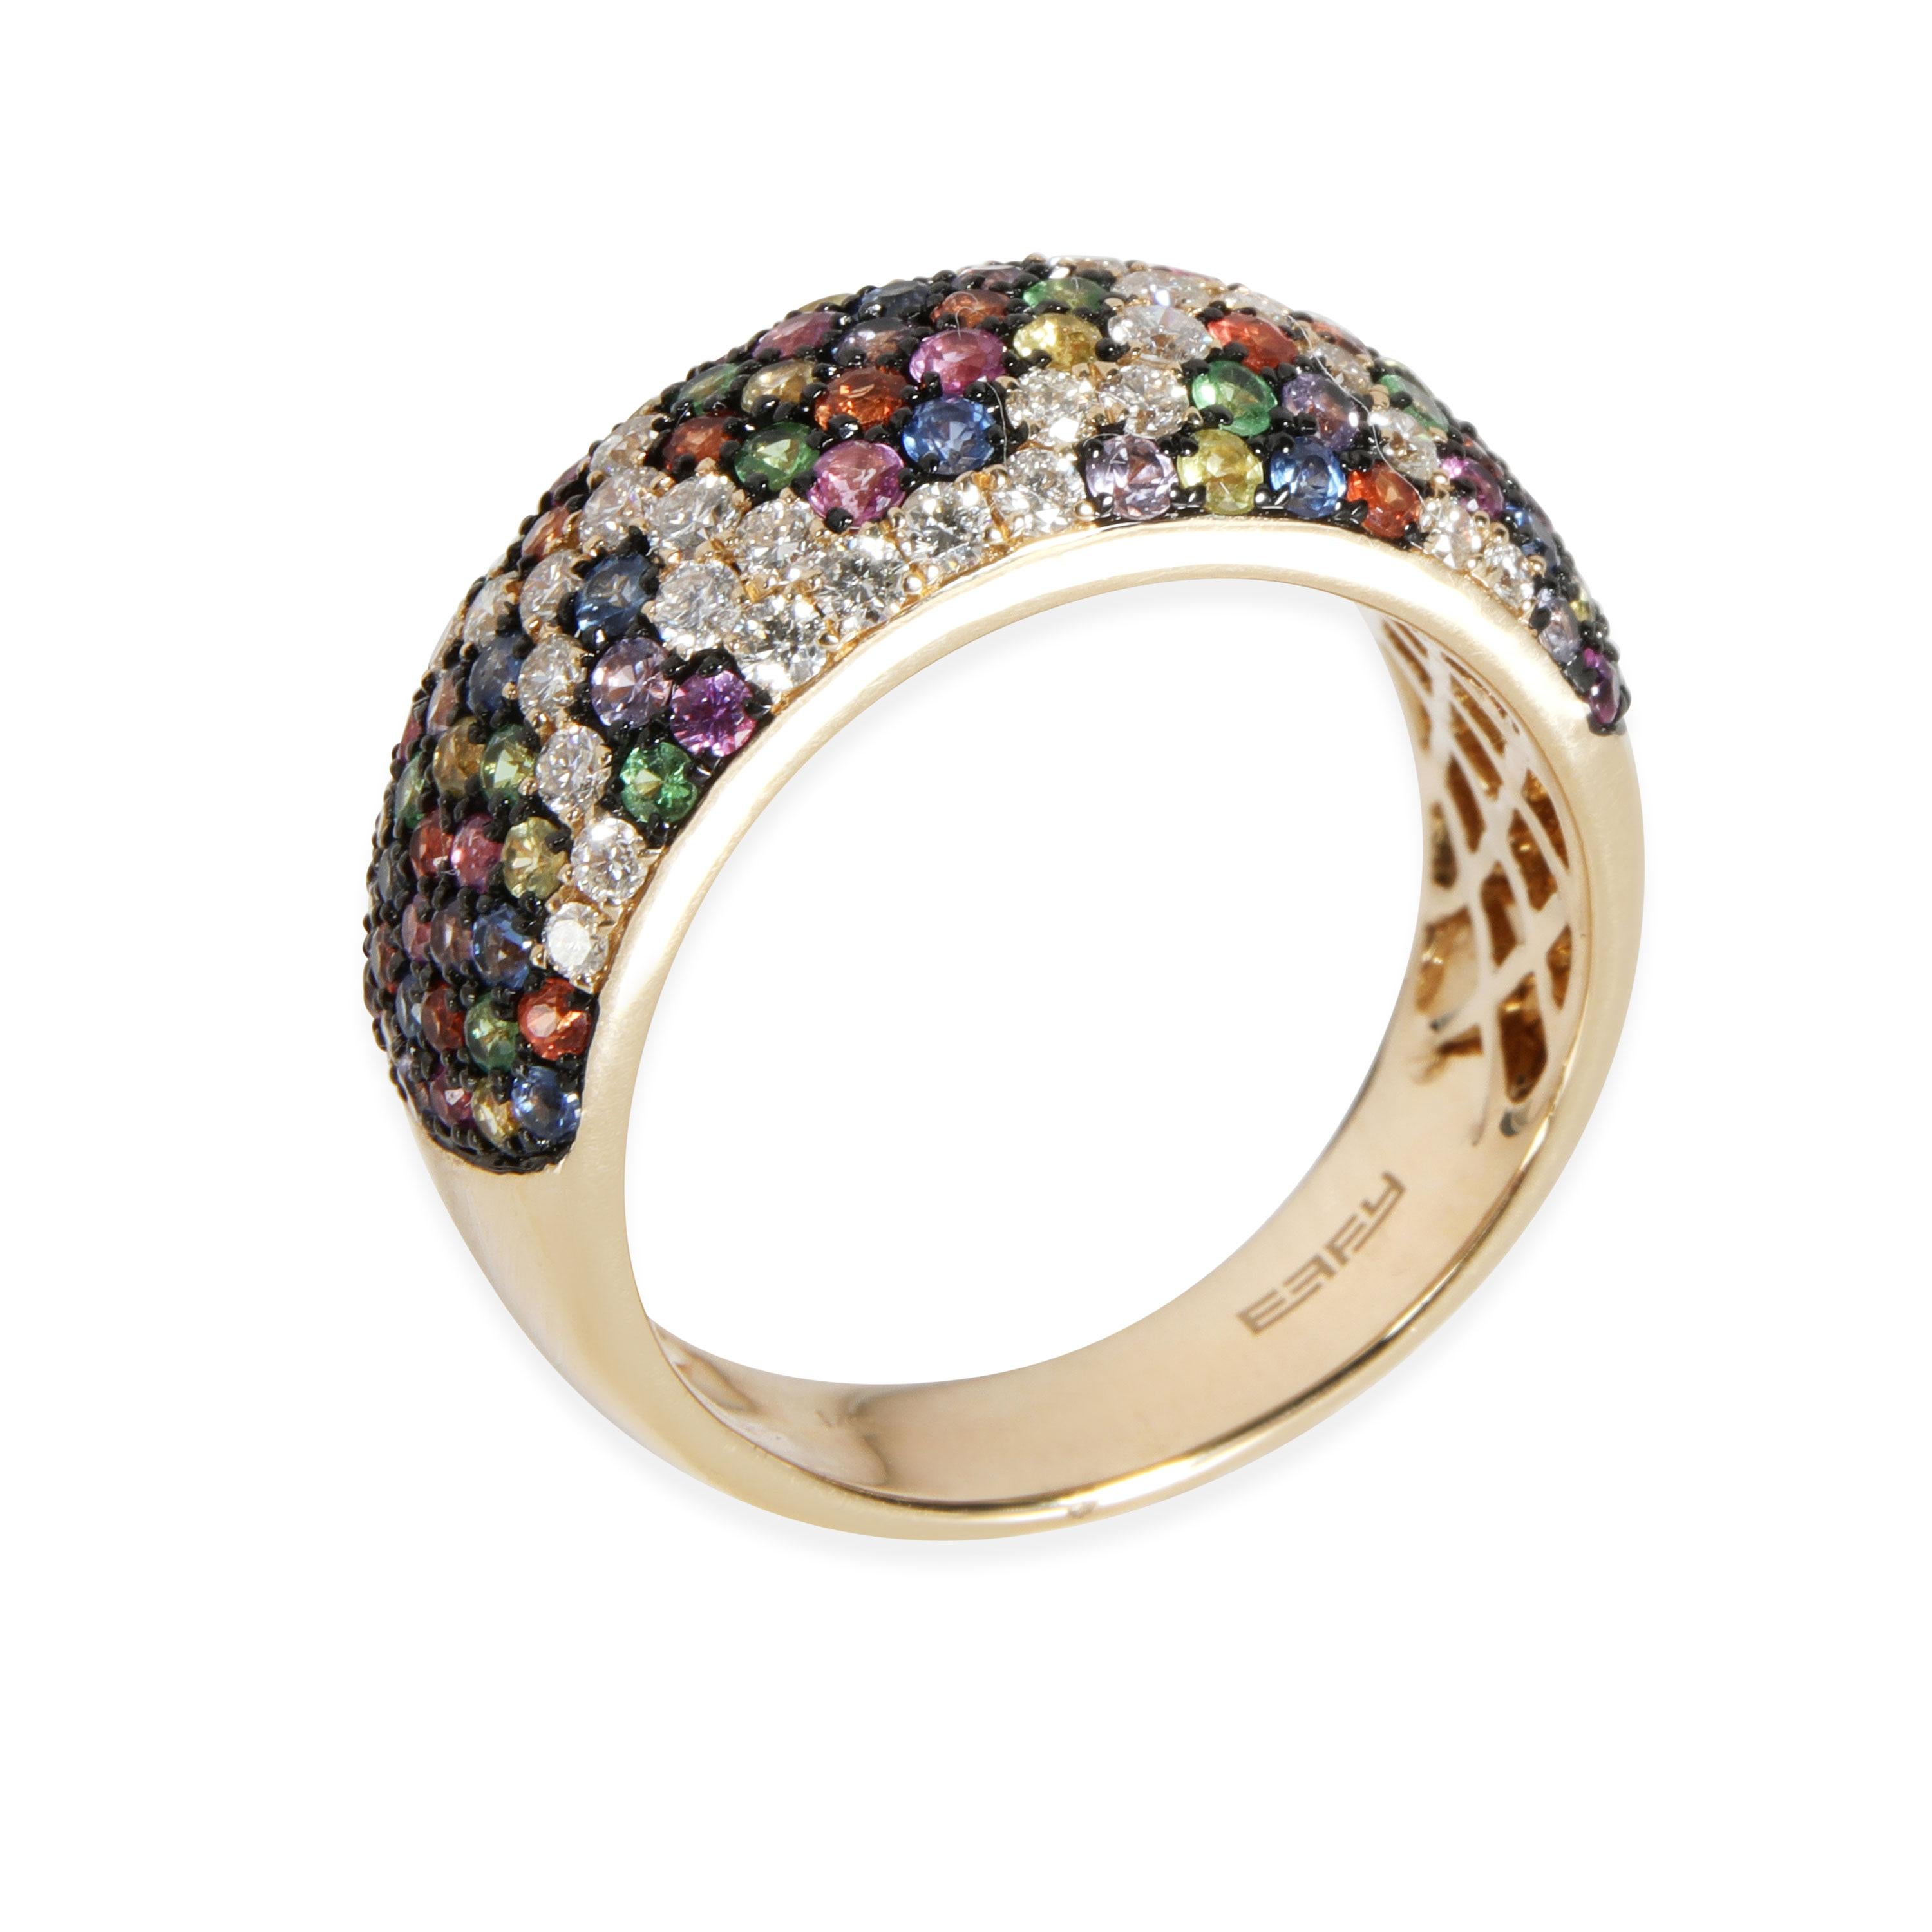 Effy Multi Colored Sapphire Diamond Dome Ring in 14K Yellow Gold Mix 0.53 CTW

PRIMARY DETAILS
SKU: 111751
Listing Title: Effy Multi Colored Sapphire Diamond Dome Ring in 14K Yellow Gold Mix 0.53 CTW
Condition Description: Retails for 4925 USD. In